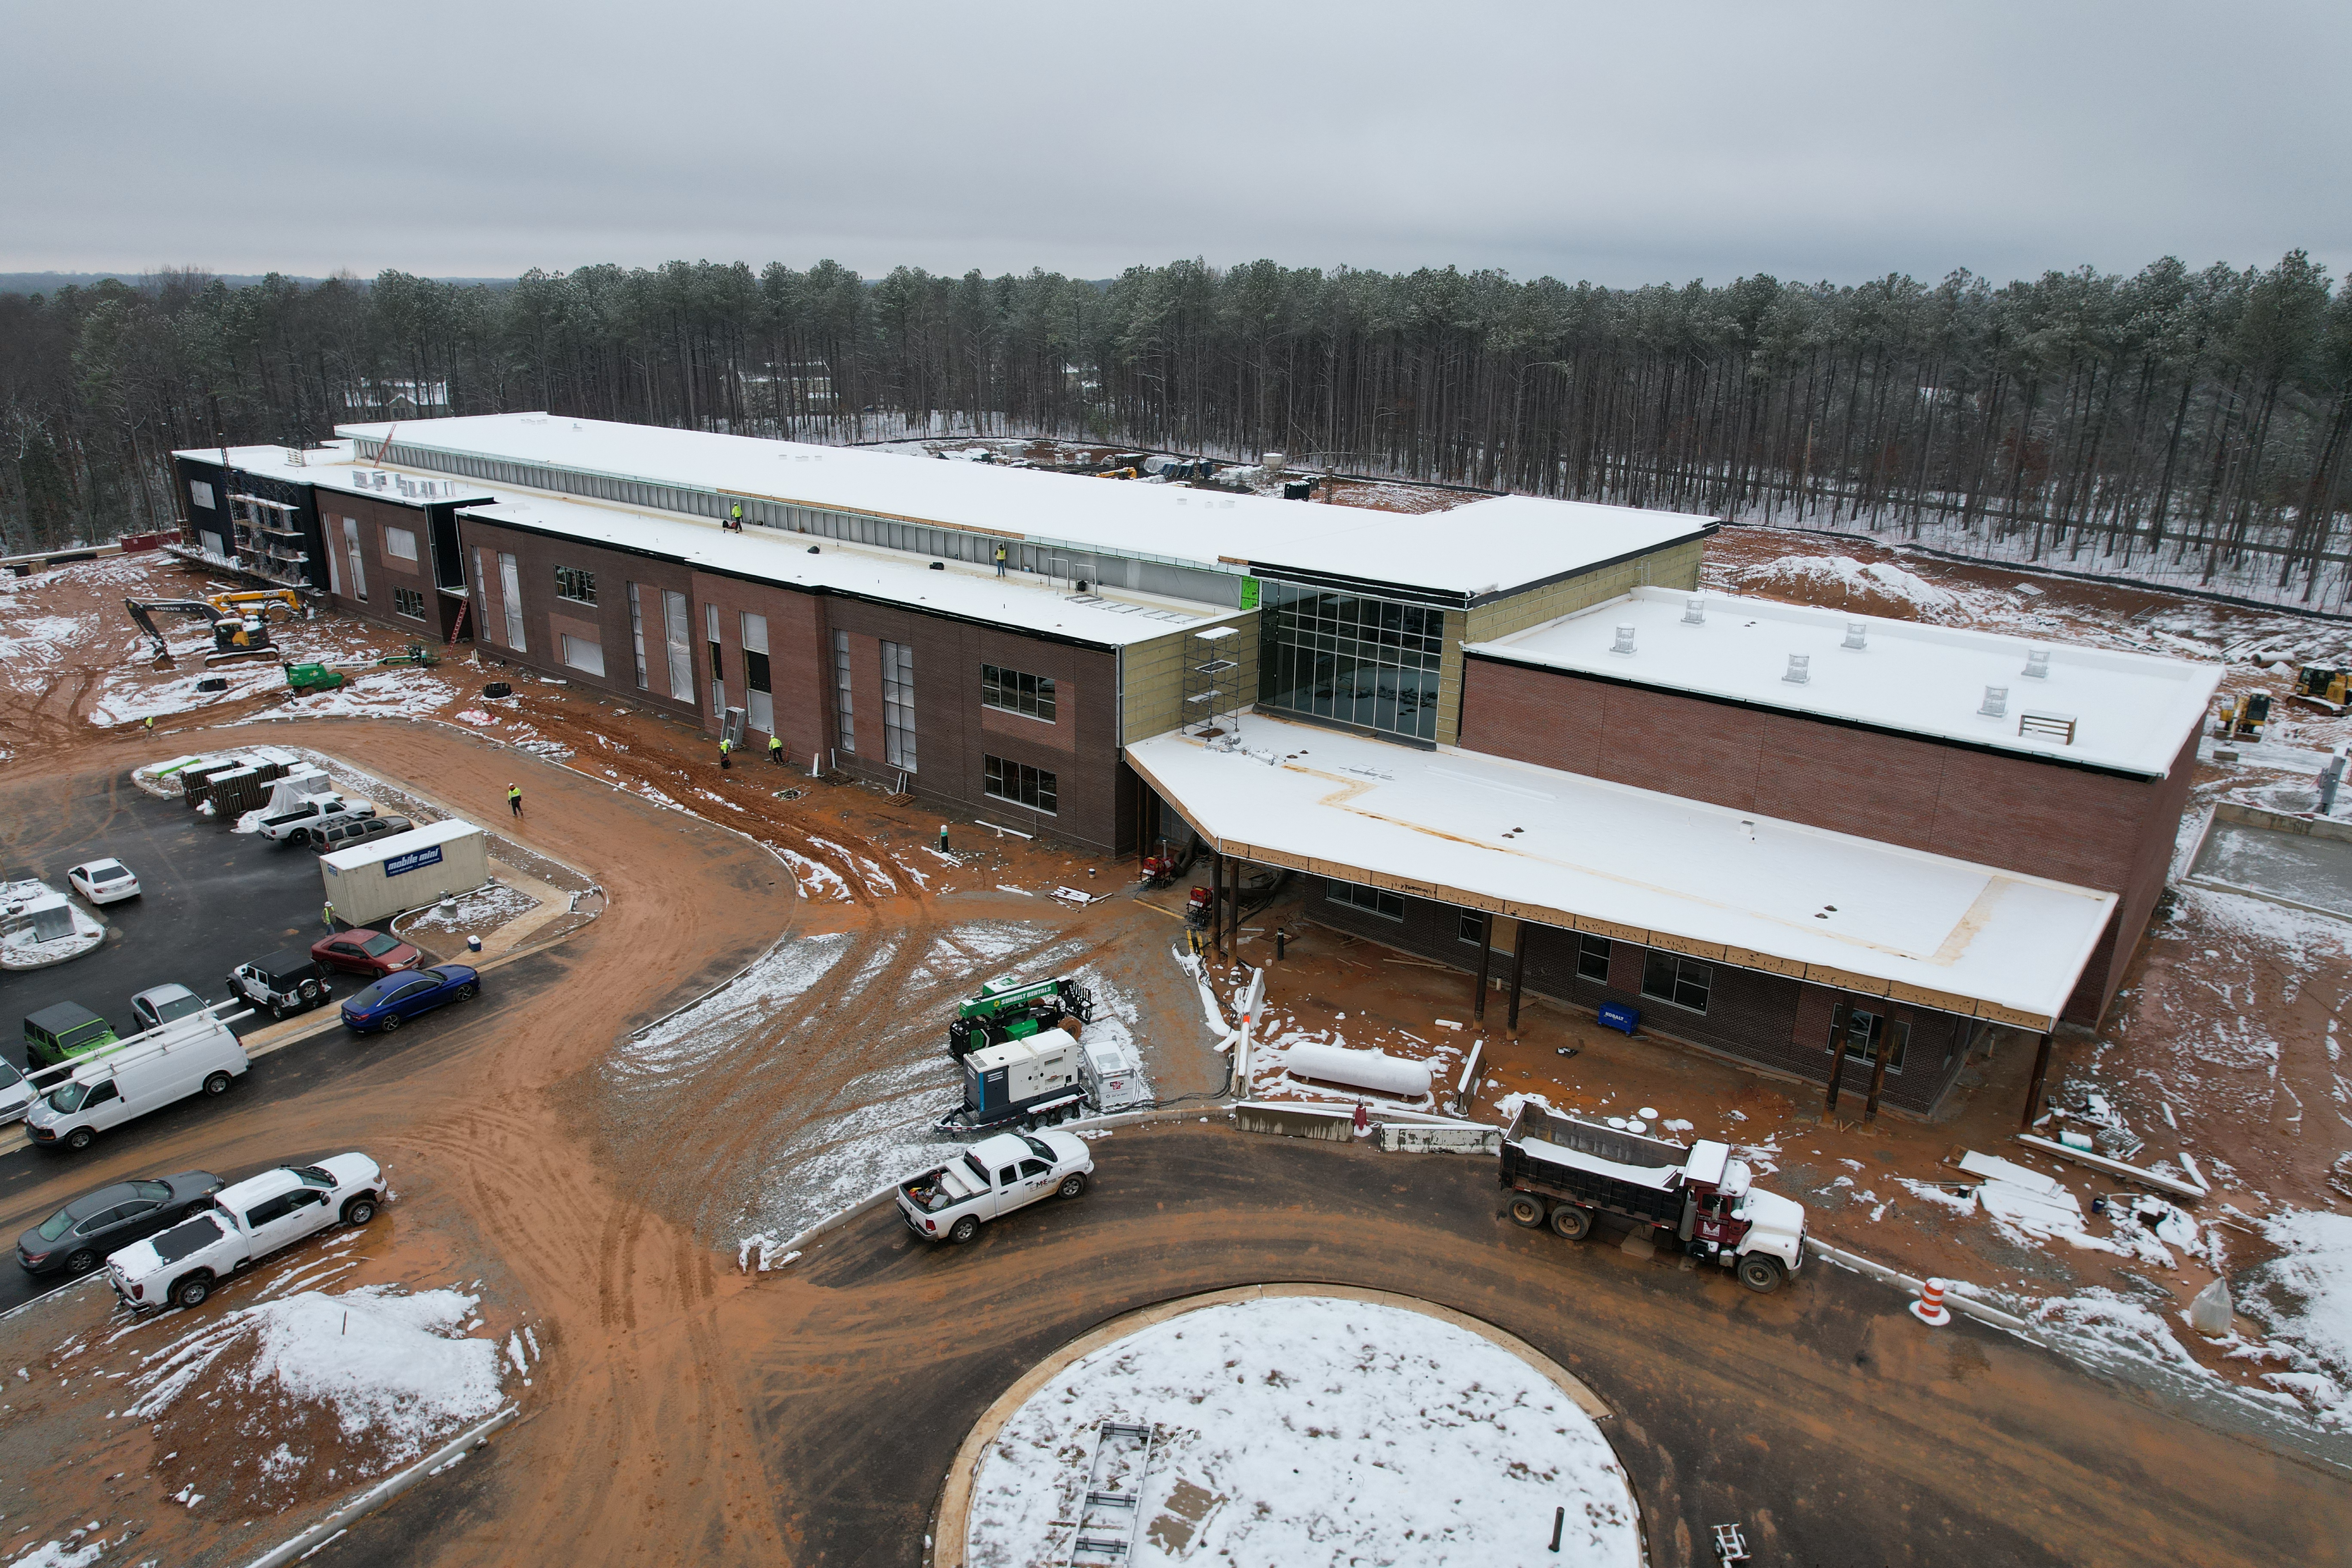 New GES exterior taken 1/16 with snow